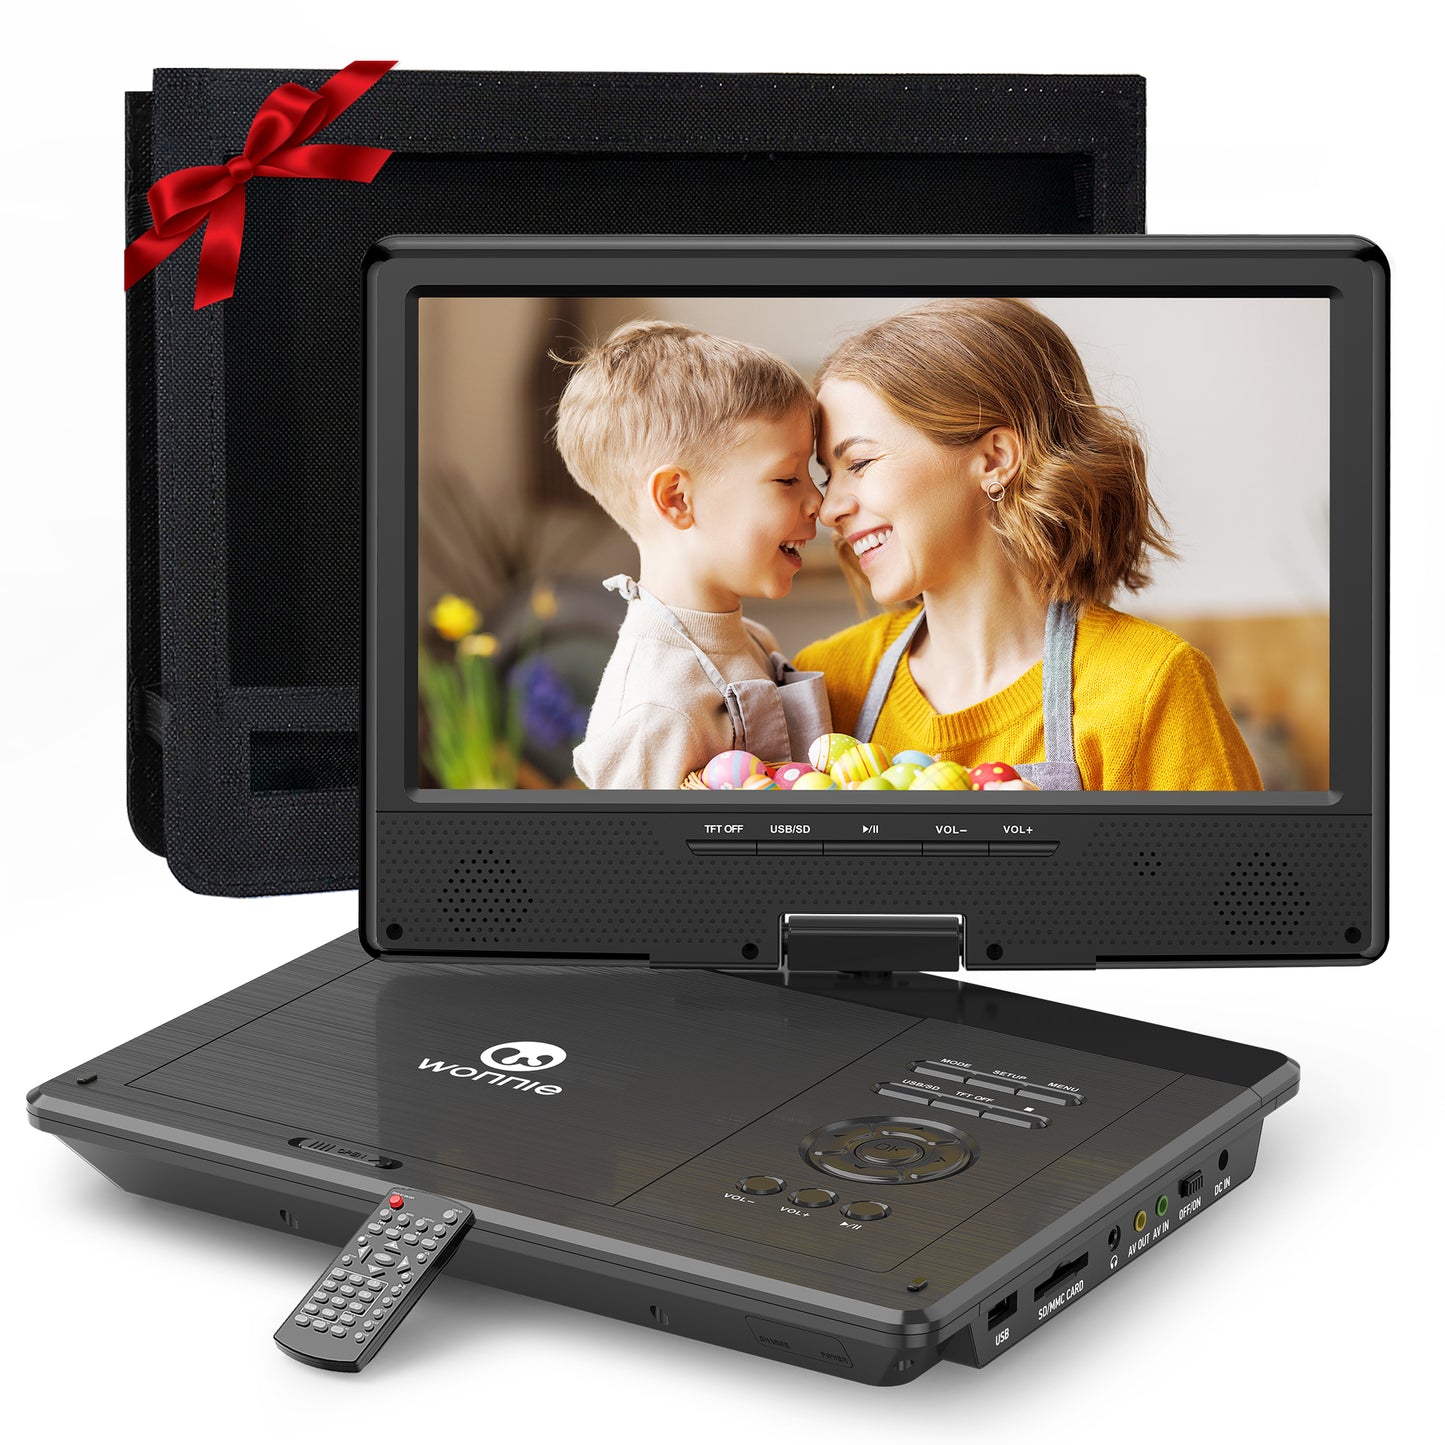 WONNIE 12.5" Portable DVD Player, Premium 10.5" HD Swivel Screen DVD Player for Kids, Built in 5 hours Rechargeable Battery Car DVD Player Support USB/SD Card/Sync TV (Car Headrest holder included)